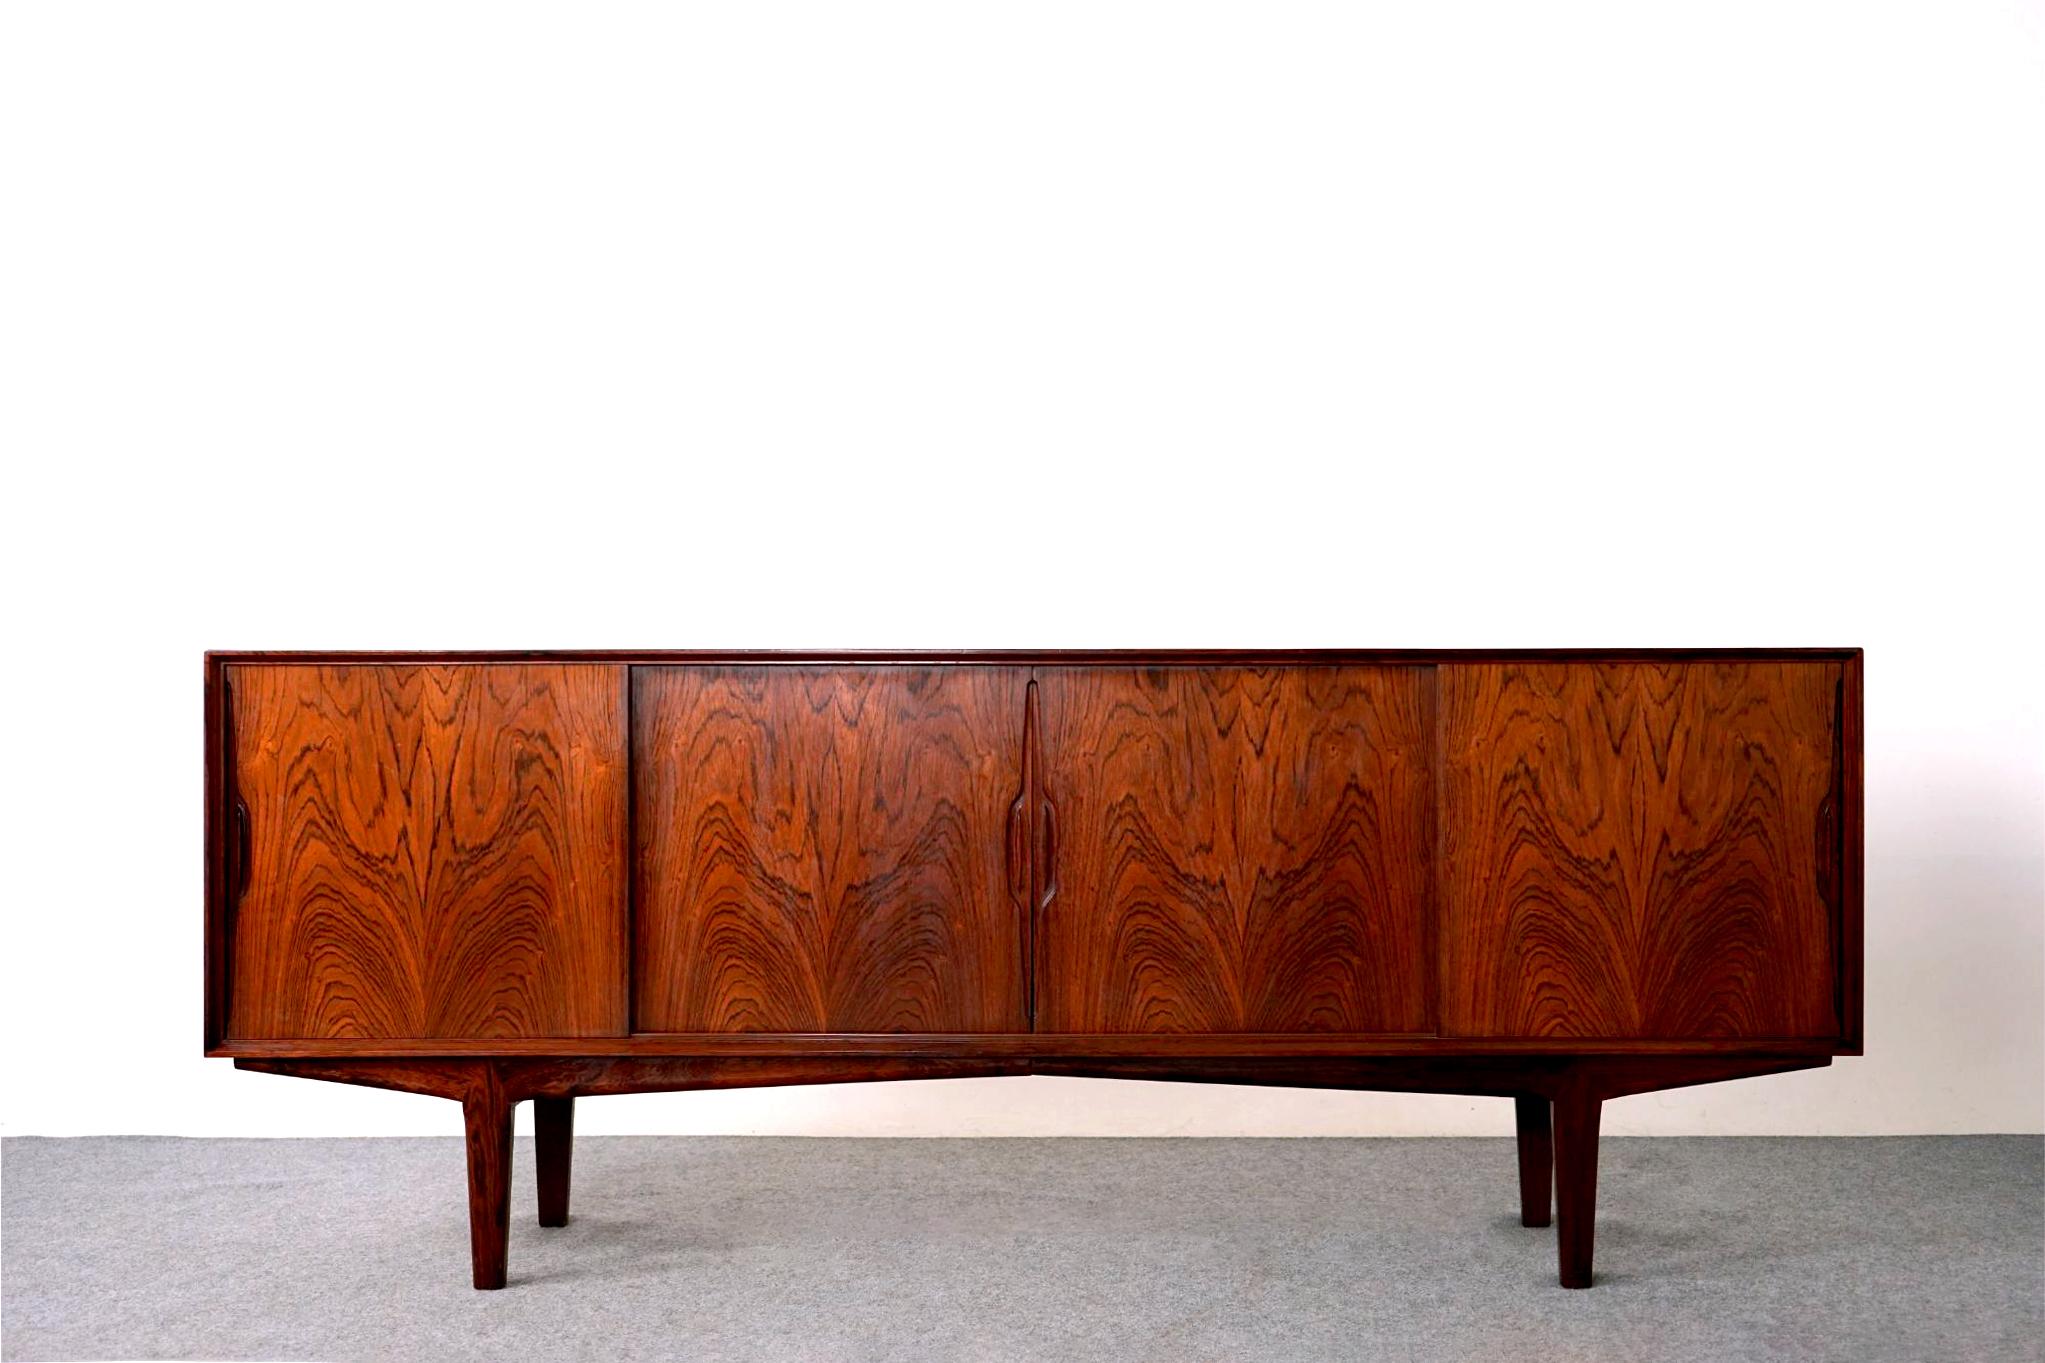 Rosewood Danish sideboard, circa 1960's. Clean, simple lined design with exceptional book-matched veneer, stunning! Low profile cabinet with adjustable shelving, removable legs and unique hand pulls. Interior compartments showcase shelving that can